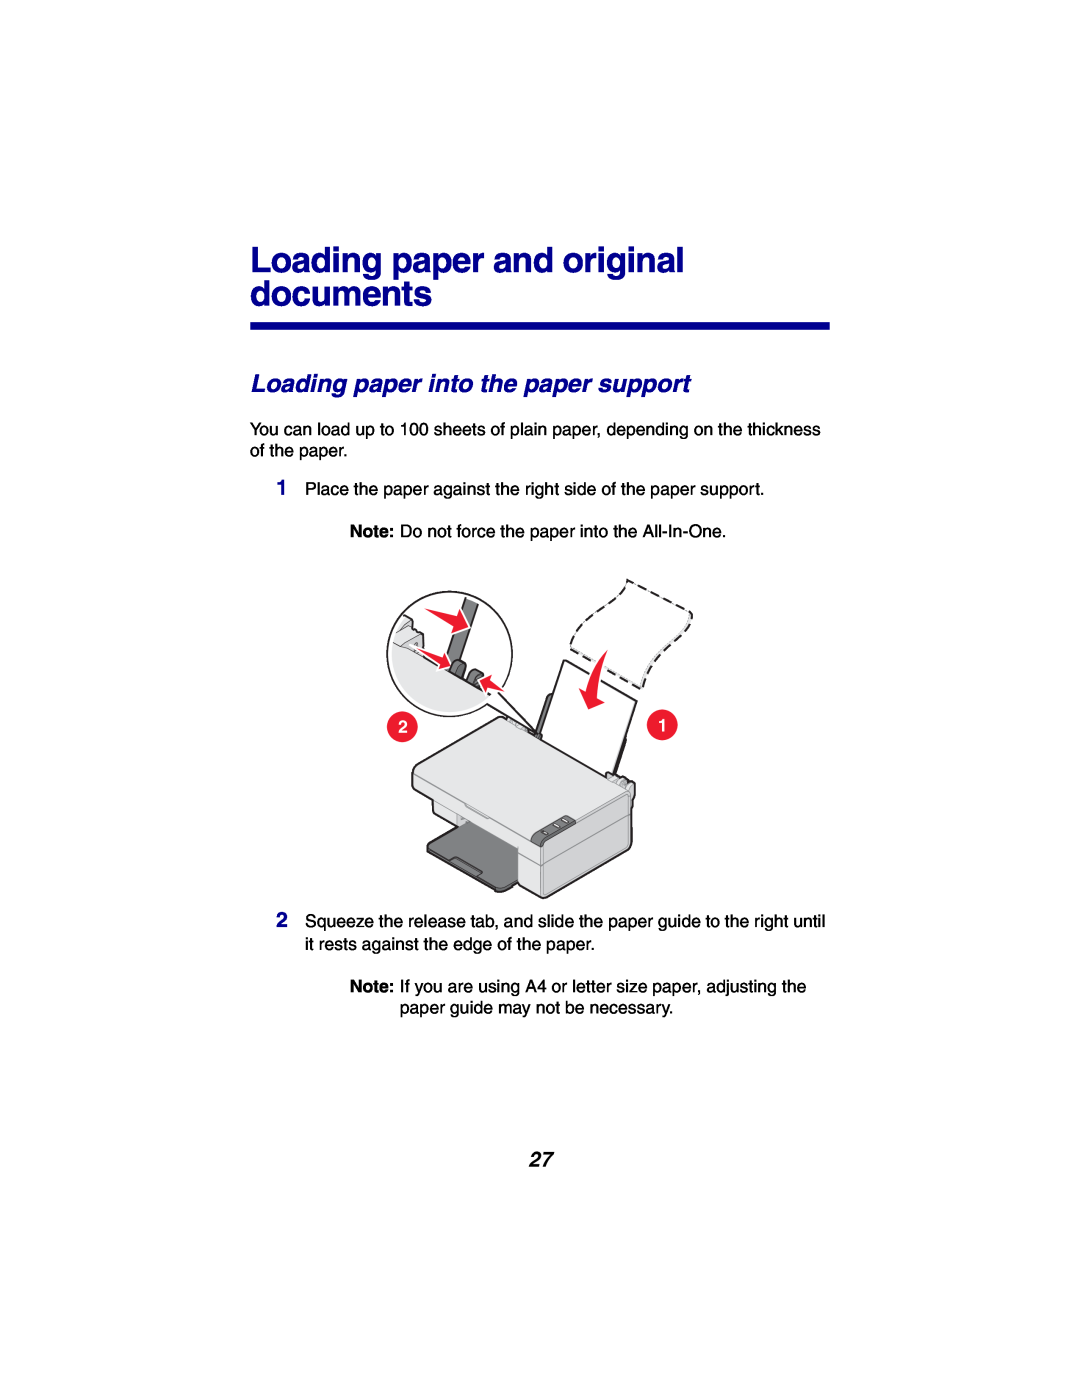 Lexmark X2300 Series manual Loading paper and original documents, Loading paper into the paper support 